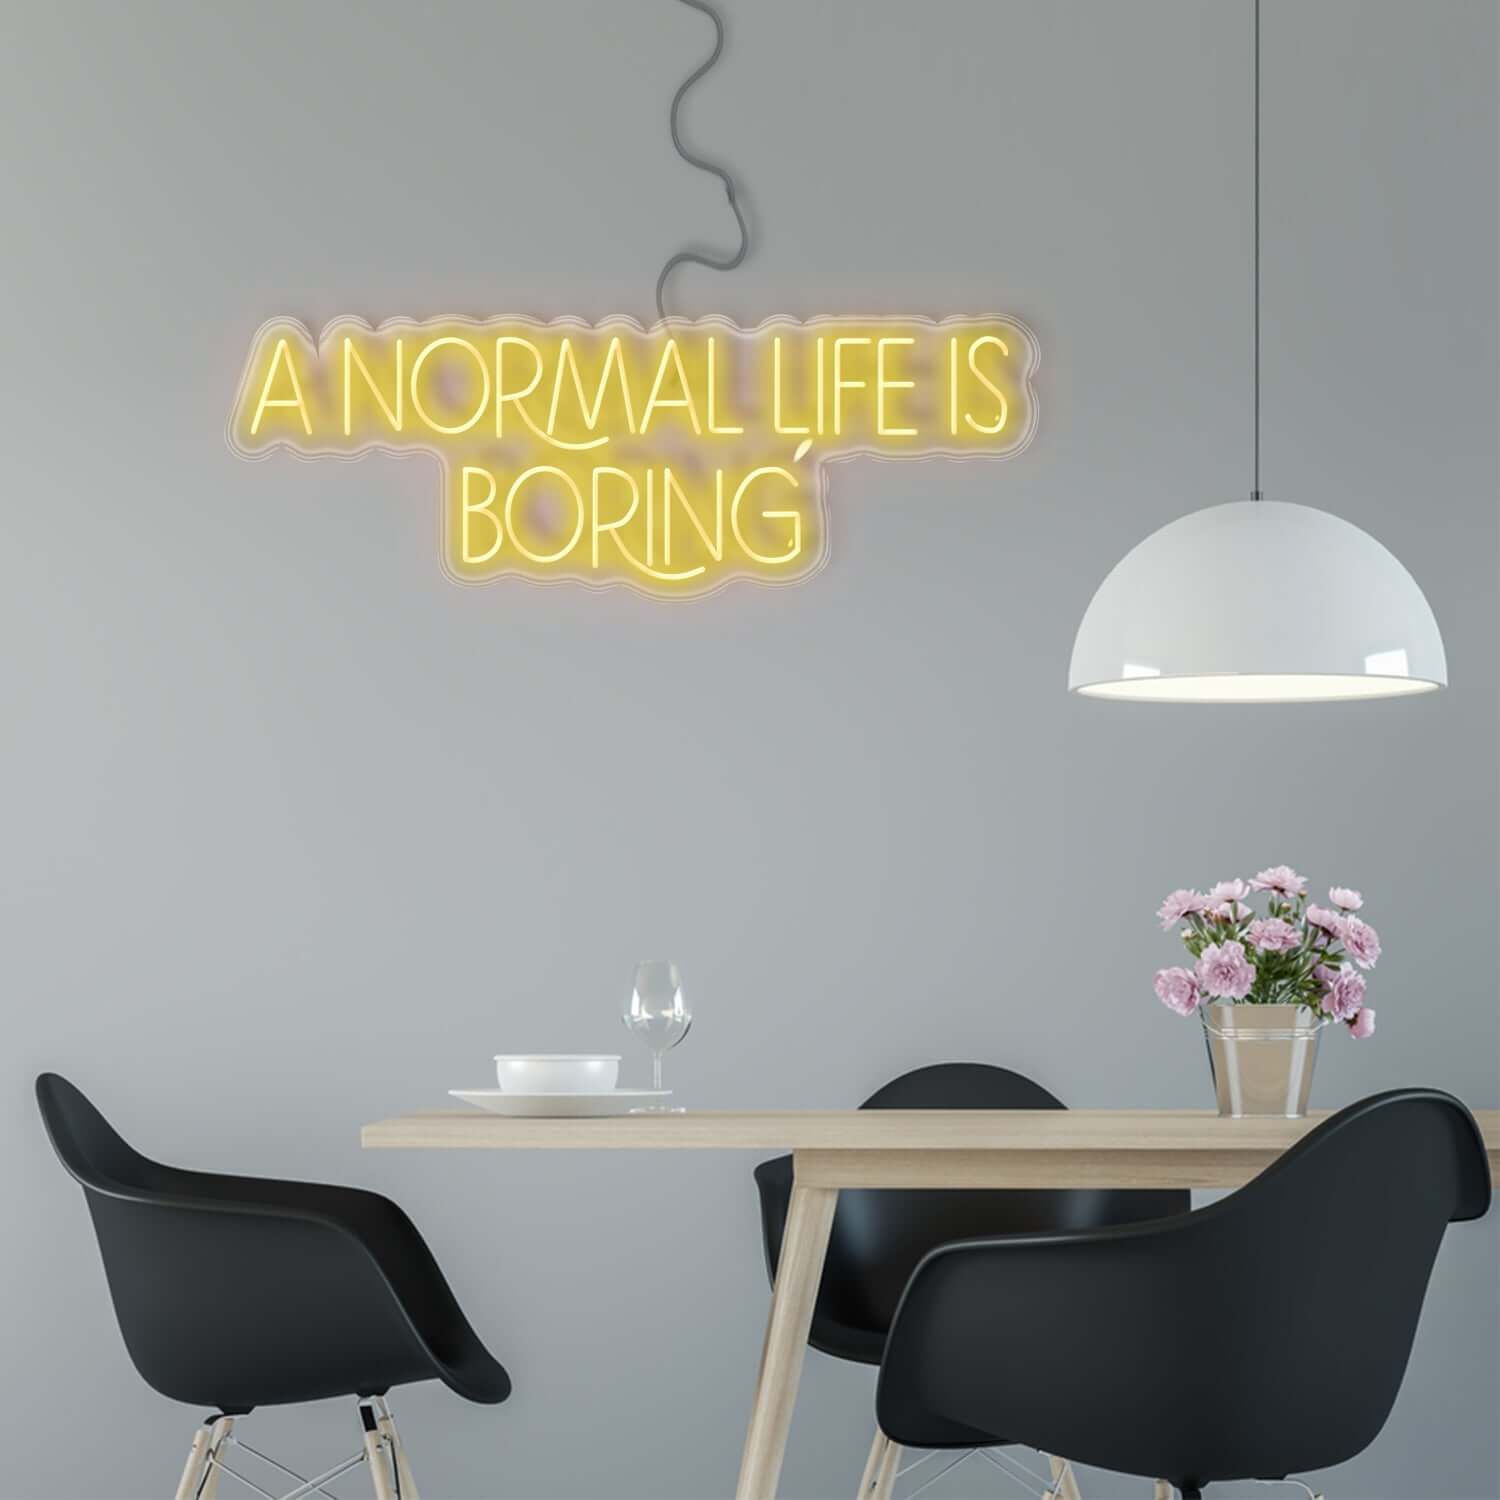 A normal life is boring